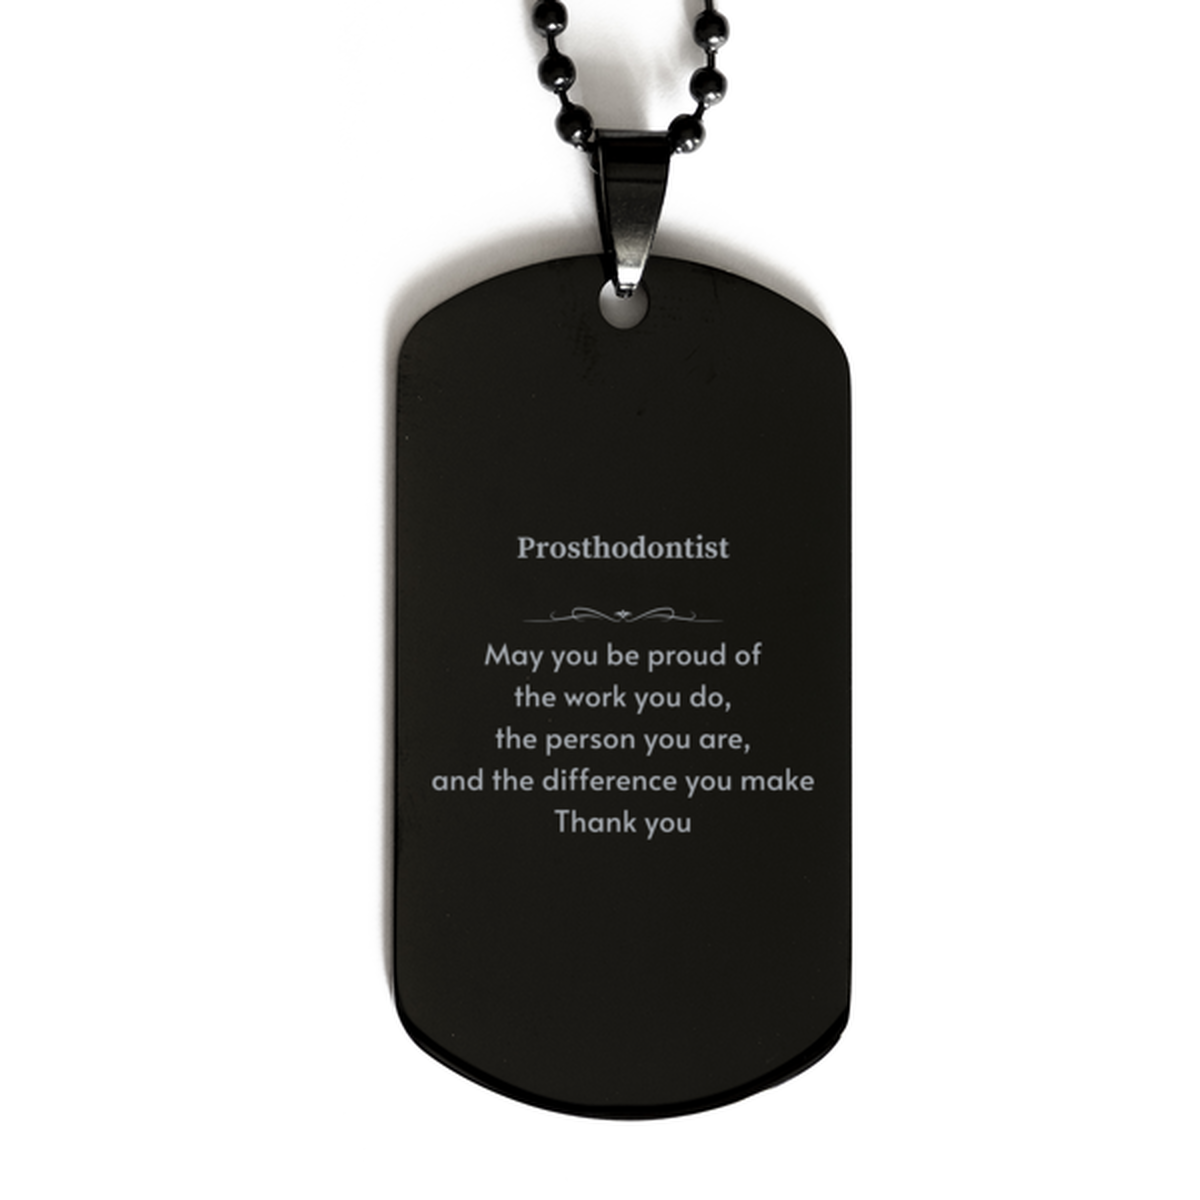 Heartwarming Black Dog Tag Retirement Coworkers Gifts for Prosthodontist, Prosthodontist May You be proud of the work you do, the person you are Gifts for Boss Men Women Friends